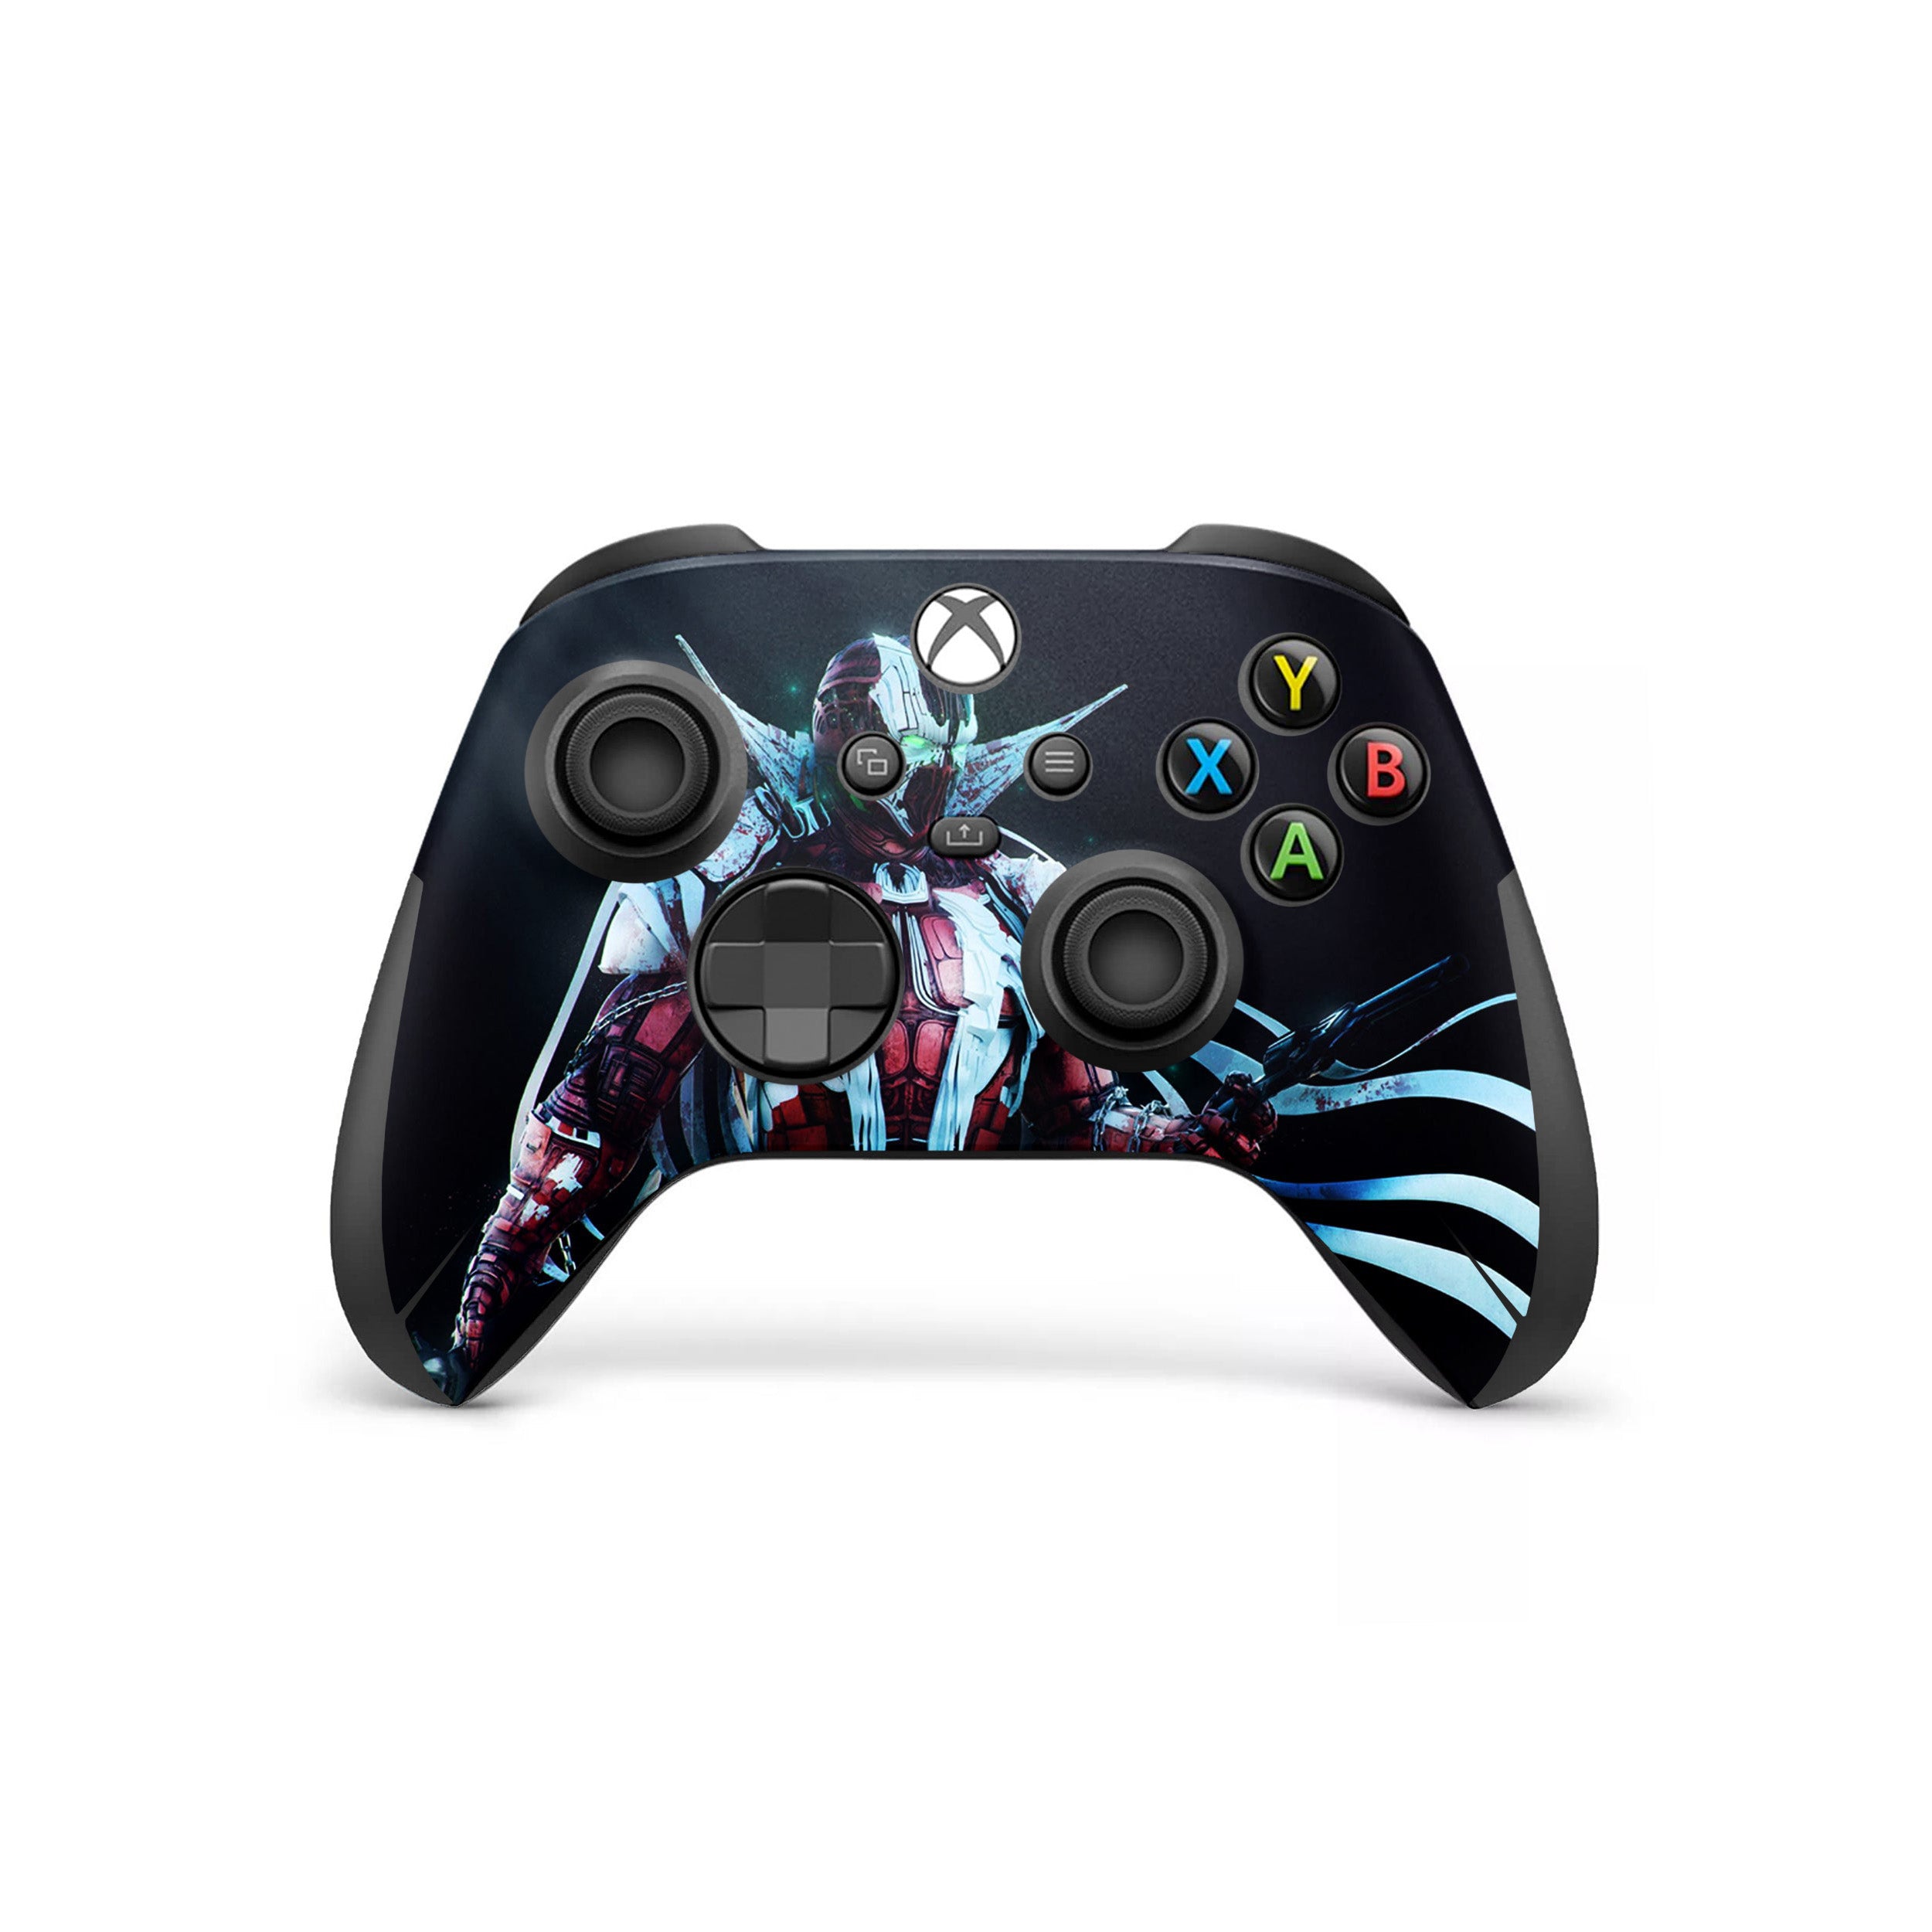 A video game skin featuring a Image Comics Spawn design for the Xbox Wireless Controller.